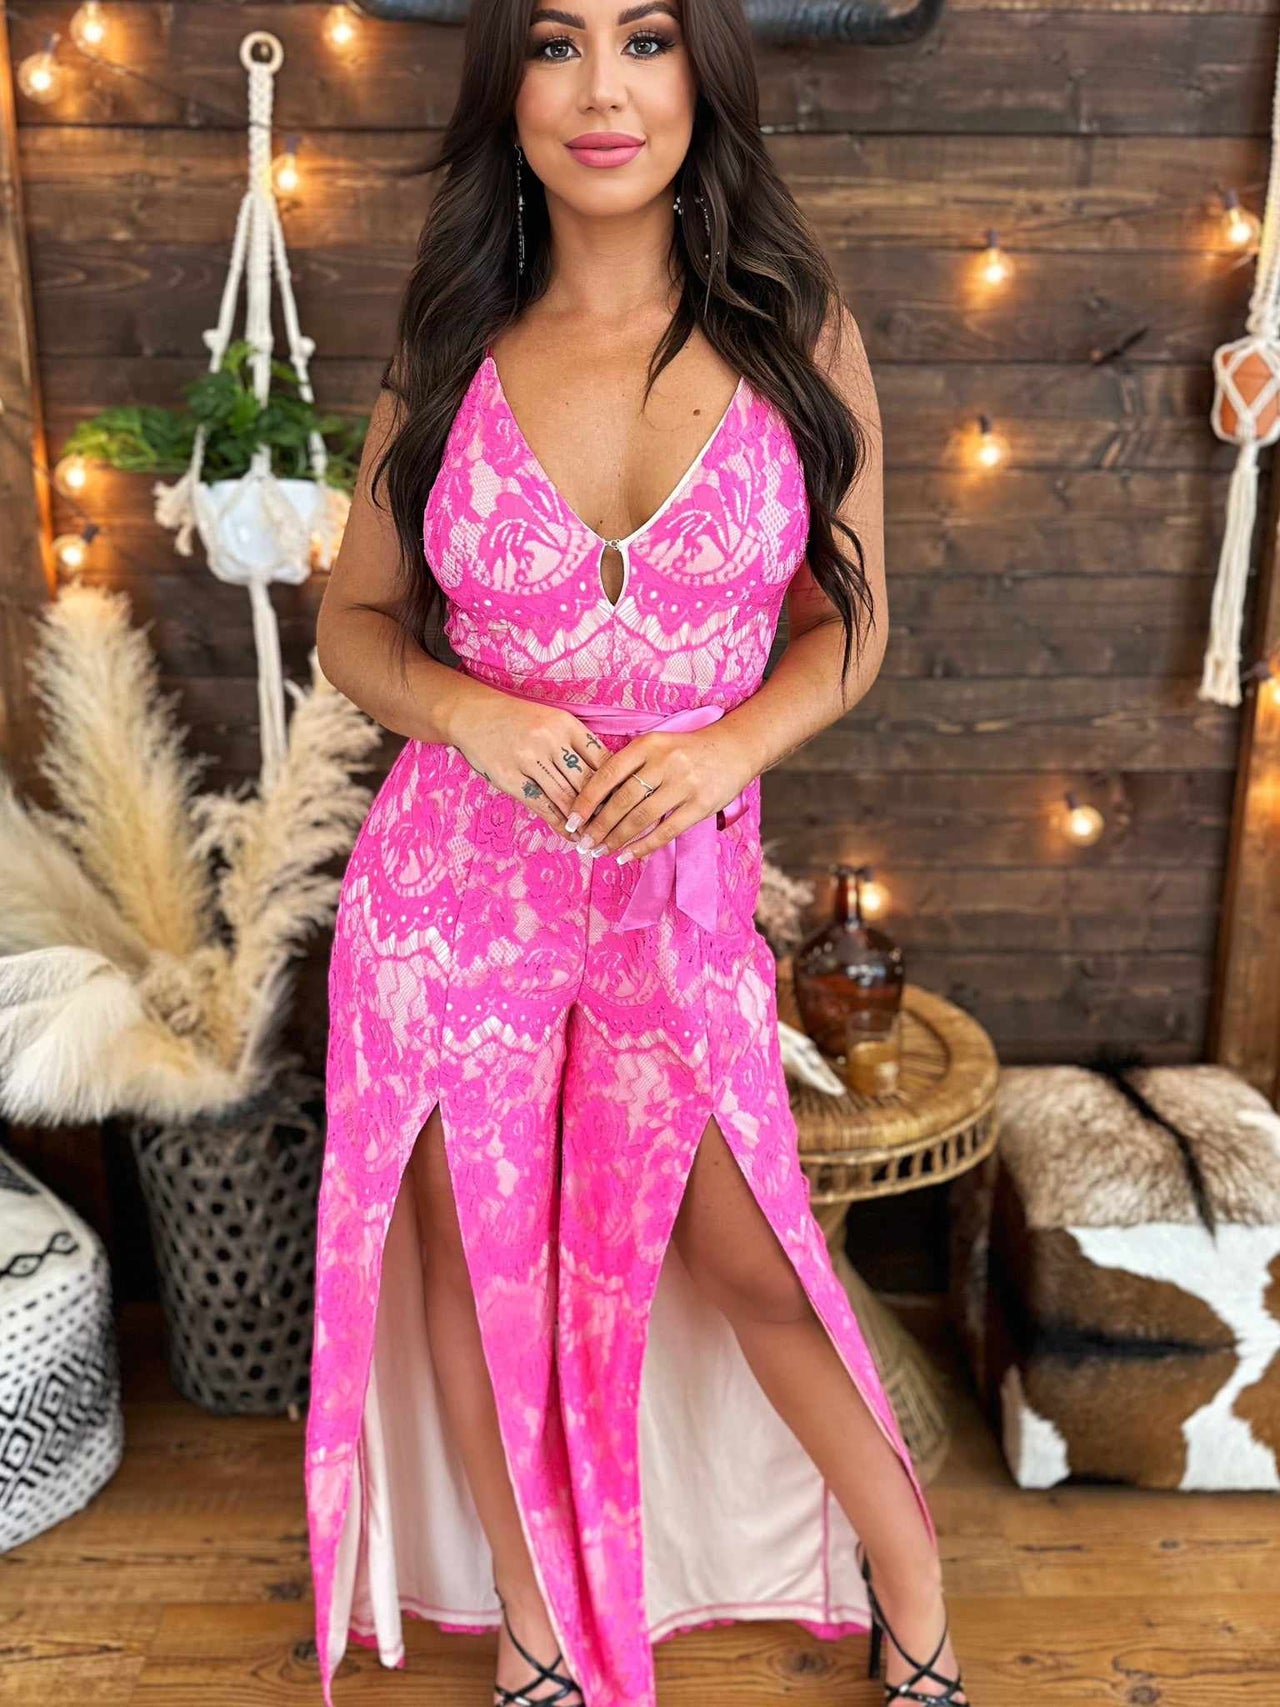 Glamorous lace back strappy smock jumpsuit in pink floral